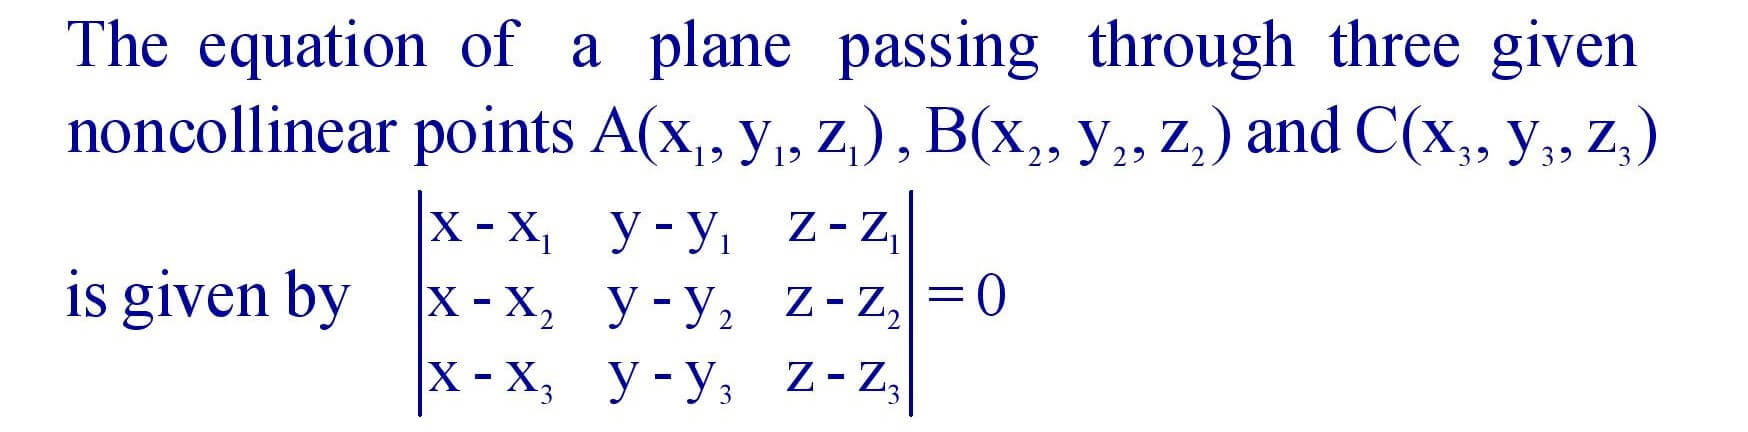 Equation of Plane passing through three given points